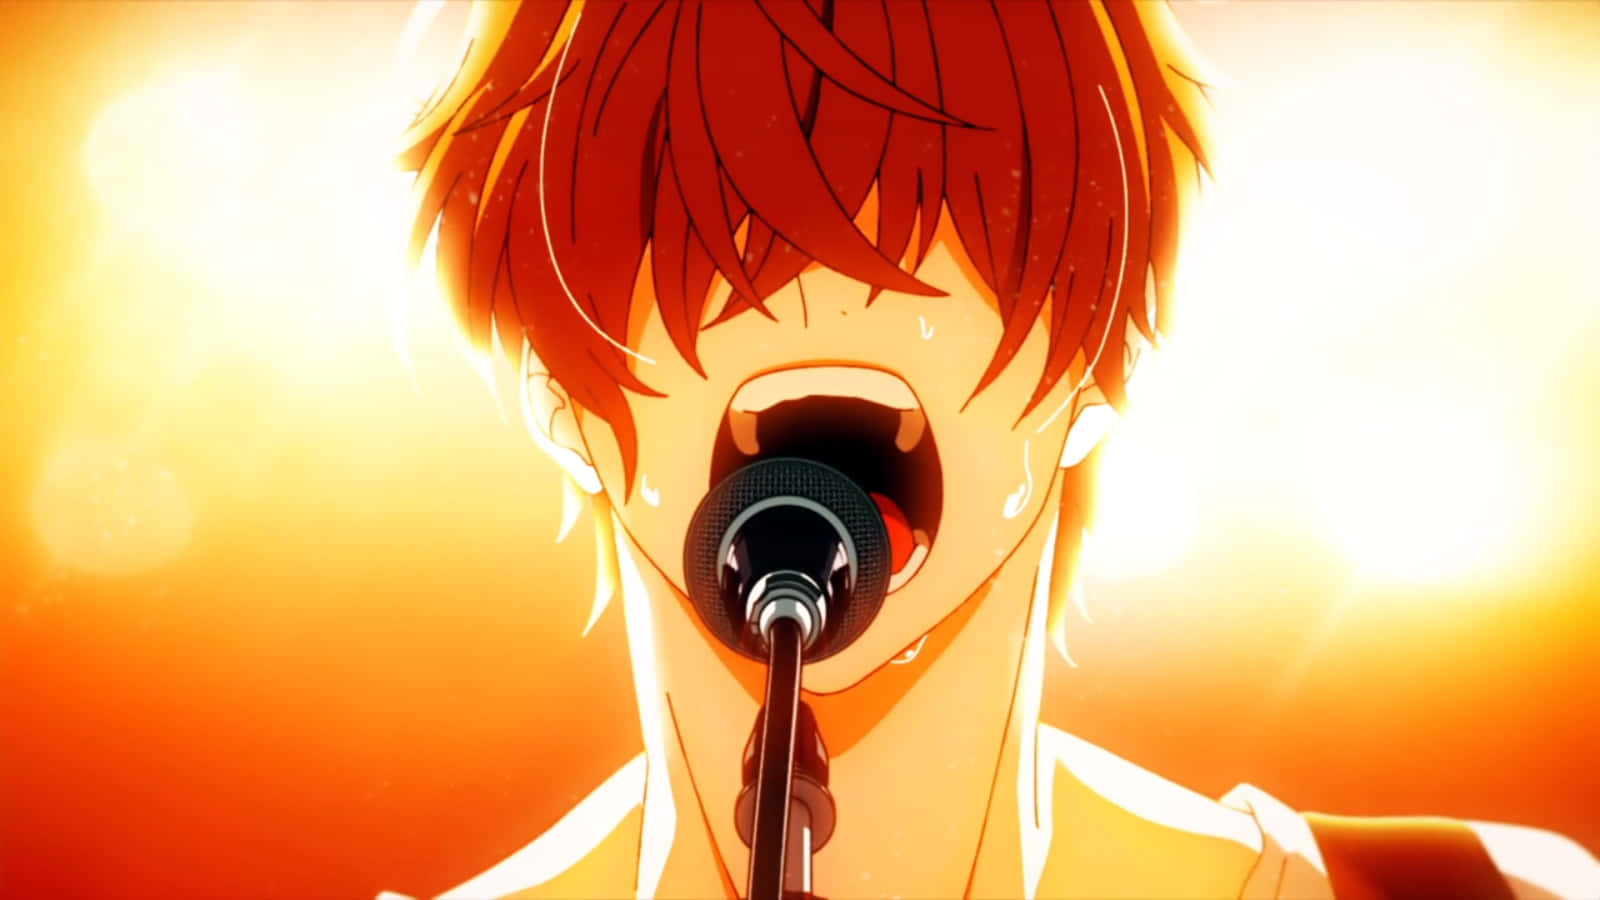 A Boy With Red Hair Singing Into A Microphone